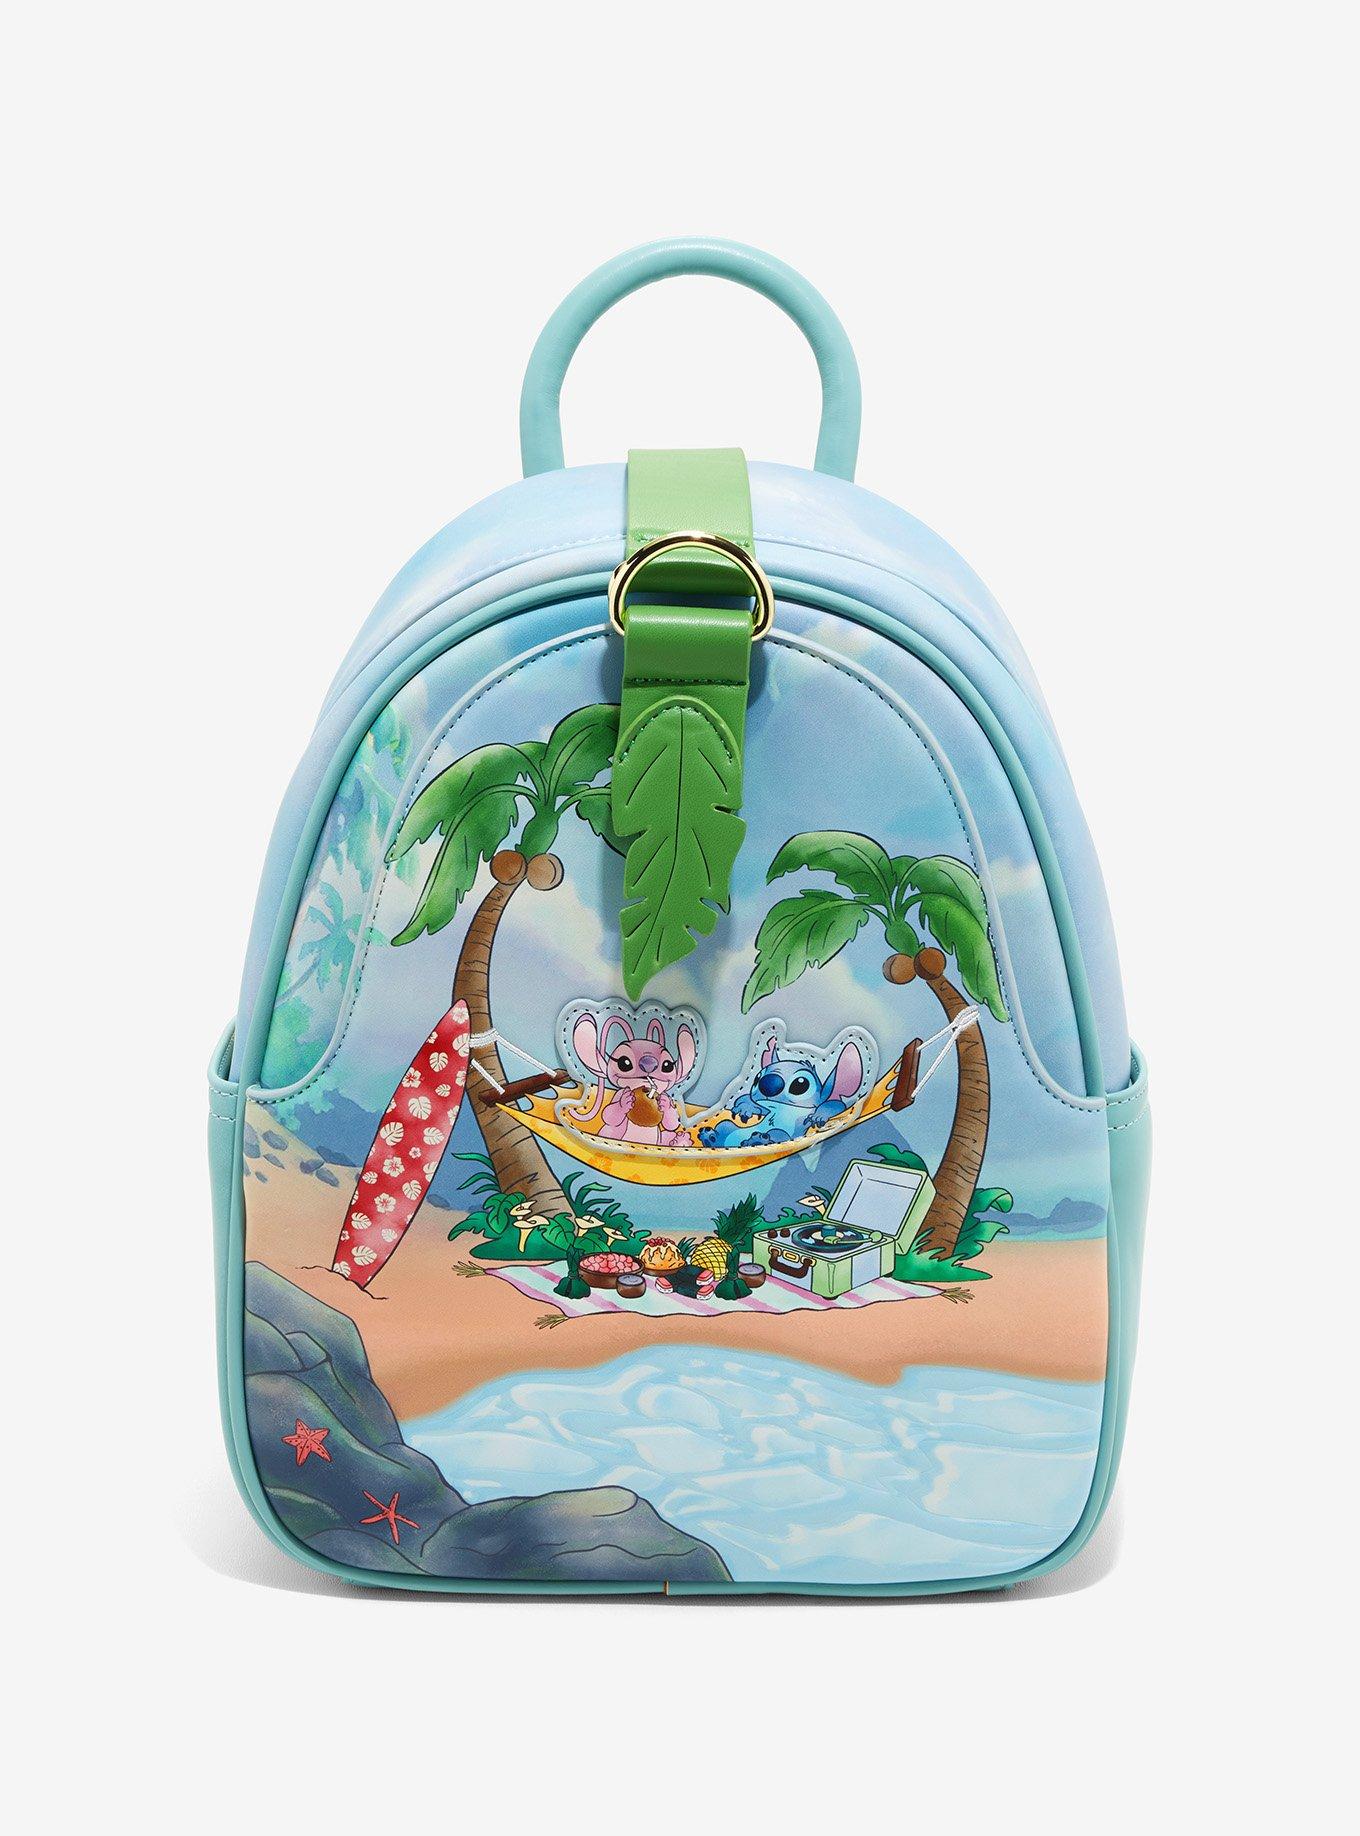 Our Universe Disney Lilo & Stitch: The Series Angel & Stitch Picnic Mini Backpack - BoxLunch Exclusive